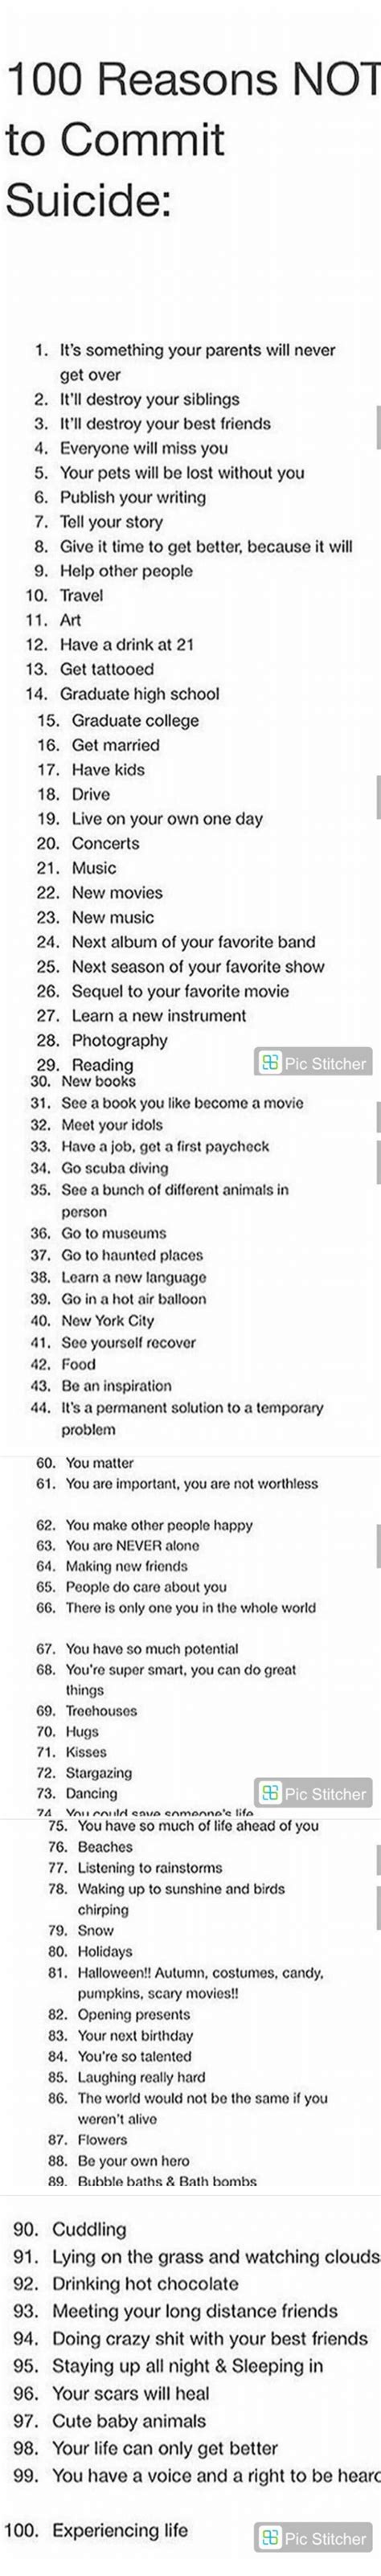 100 Reasons Not To Commit Suicide 1 Its Something Your Parents Will Never Get Over 2 Itll